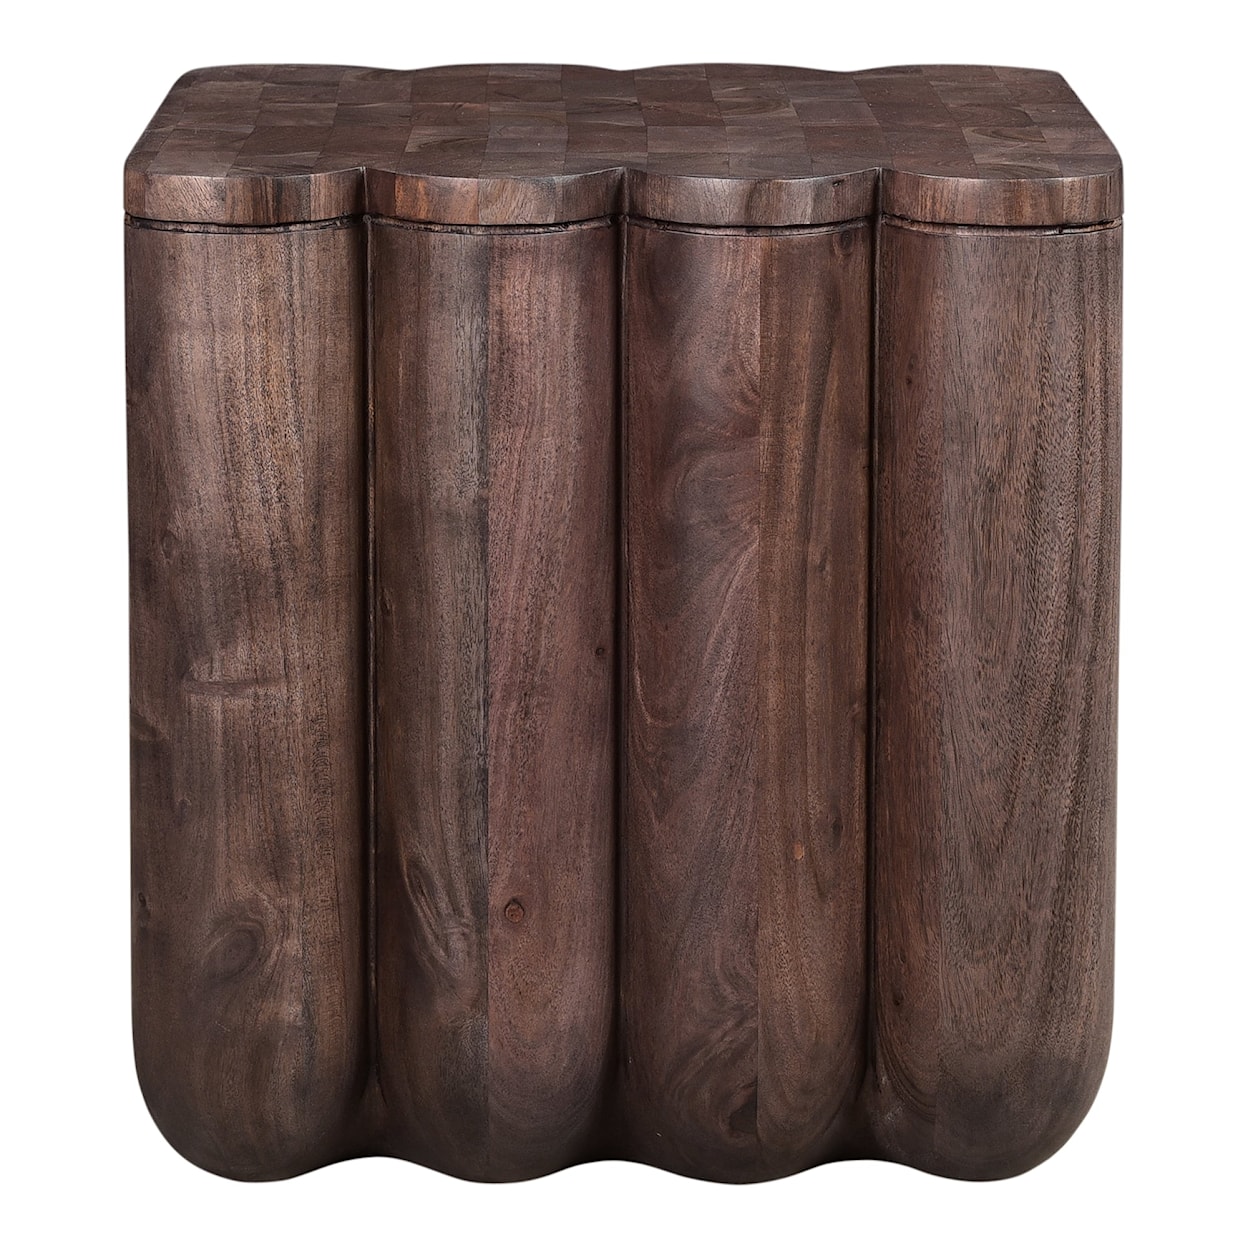 Moe's Home Collection Punyo Acacia Wood Accent Table